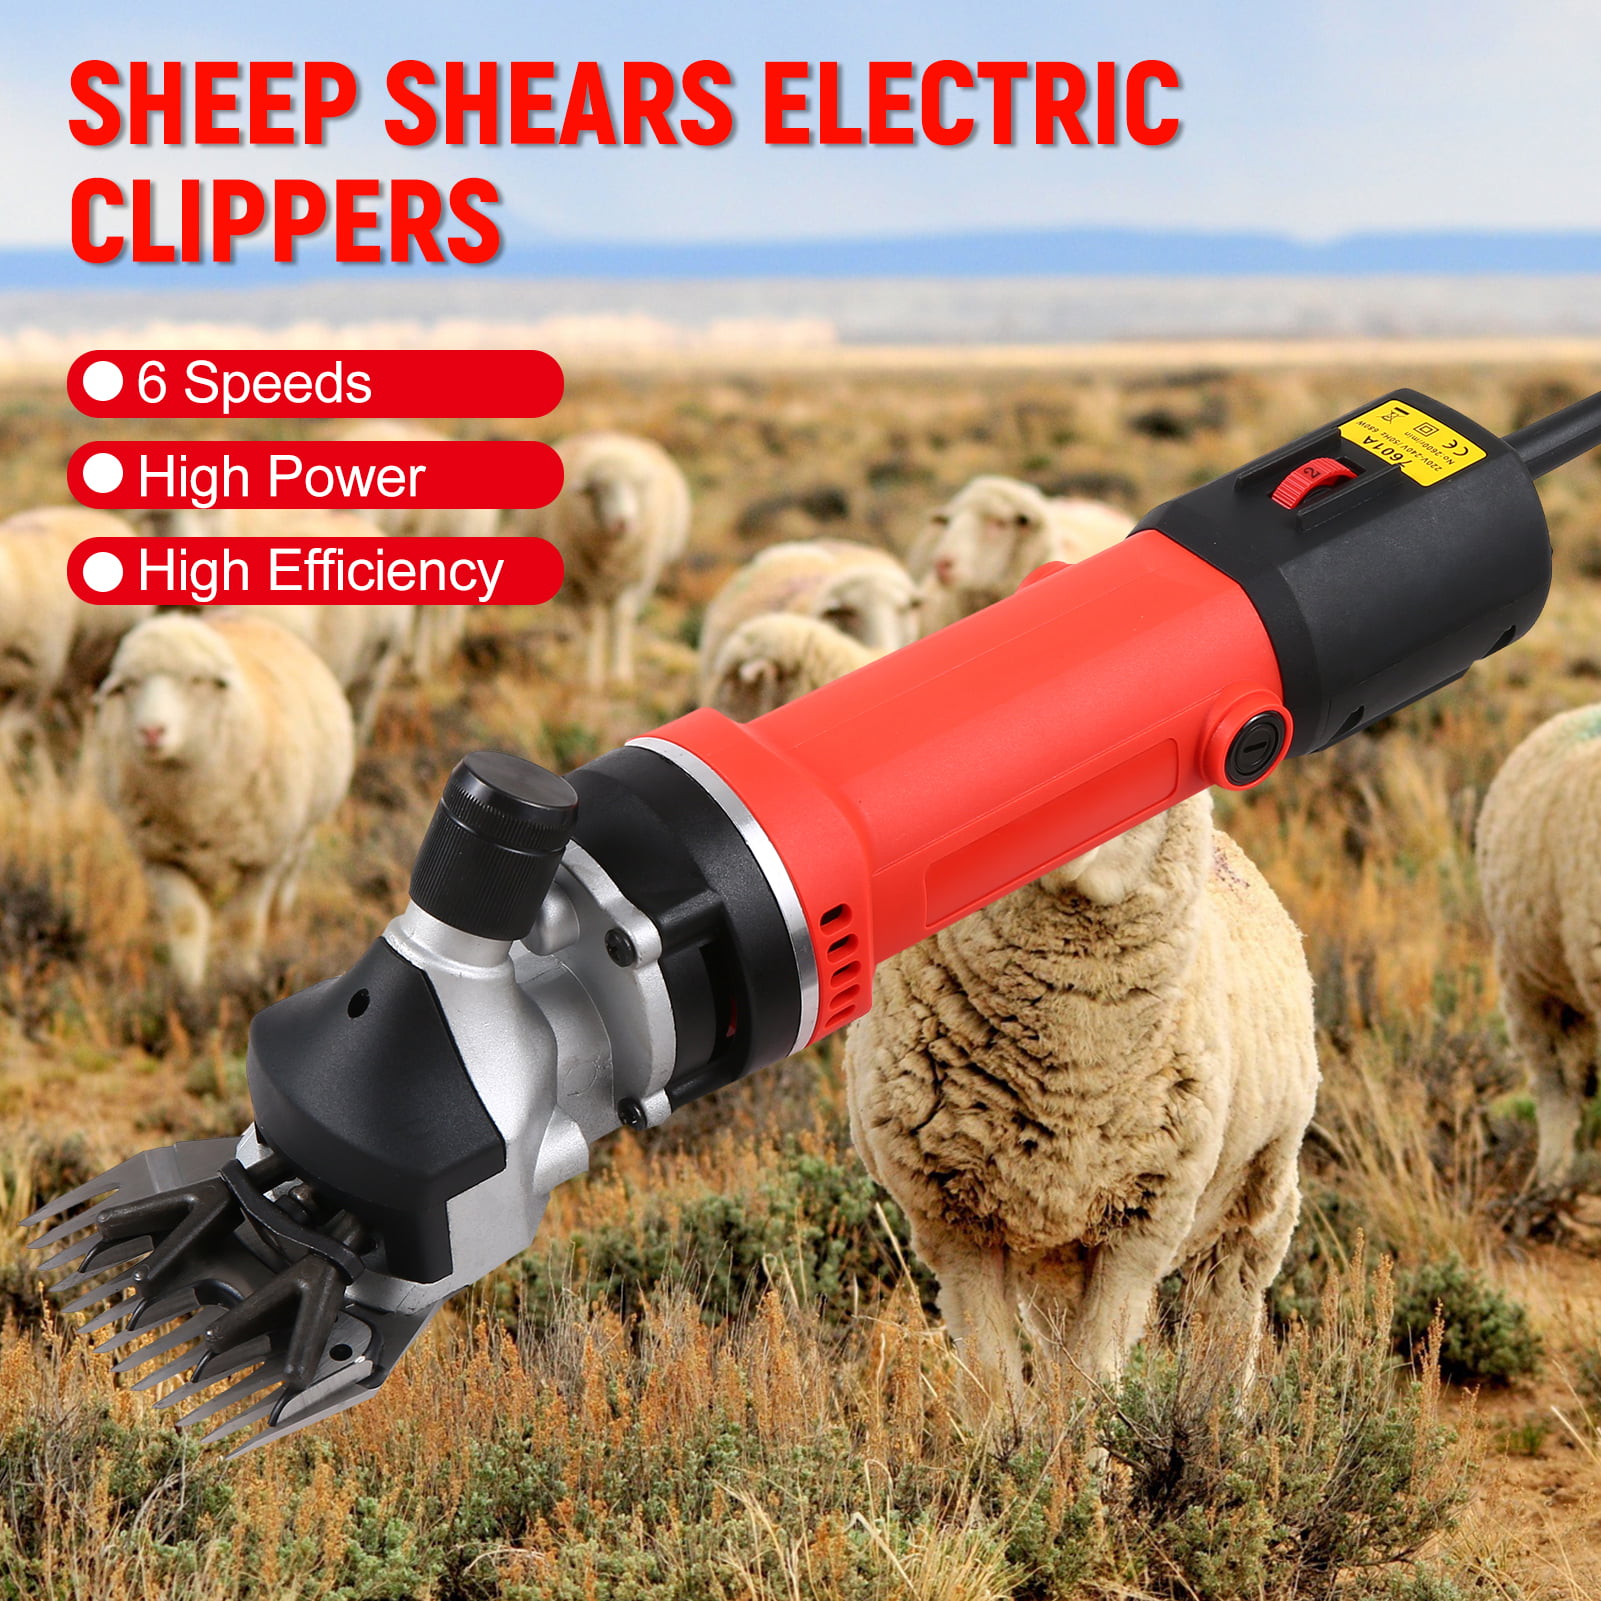 Carevas 680W Electric Sheep Shears and 6-Speed Professional Sheep Shears,  Suitable for Shearing the Hair of Sheep, Goats, Cows, Farm Animals, Pets  and